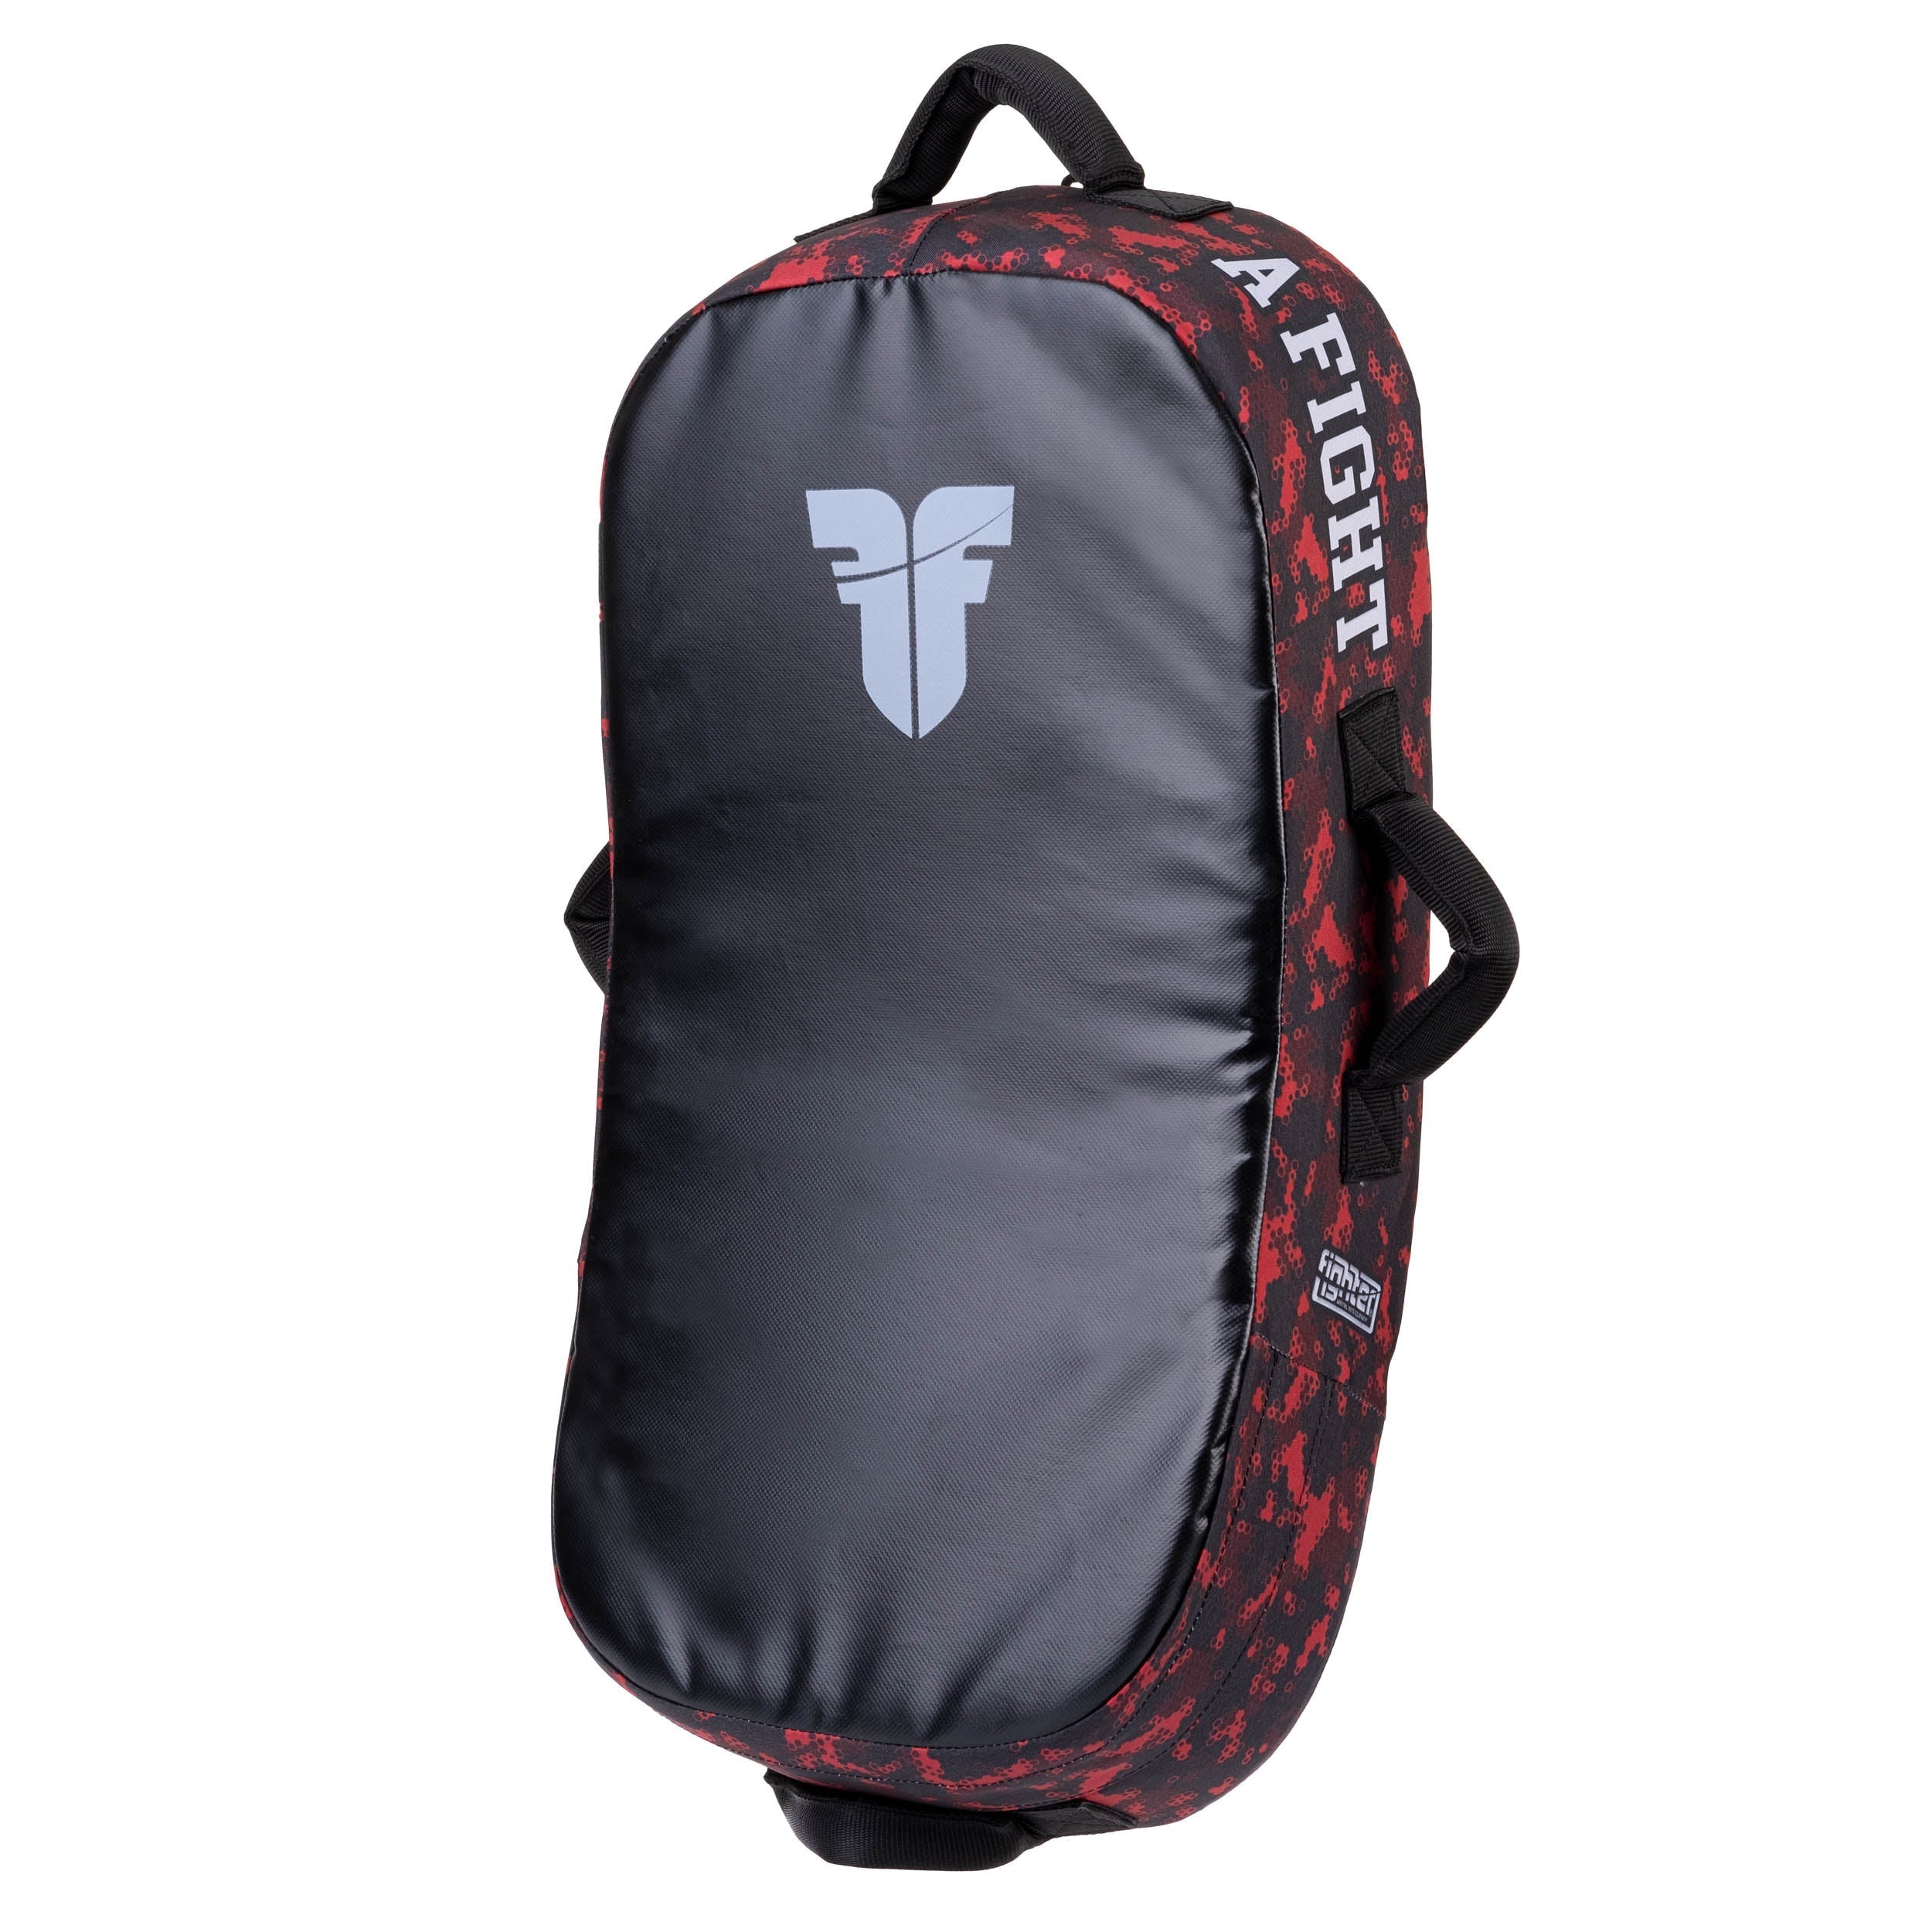 Fighter Kicking Shield - MULTI GRIP - Life is a Fight - Red Camo, FKSH-26